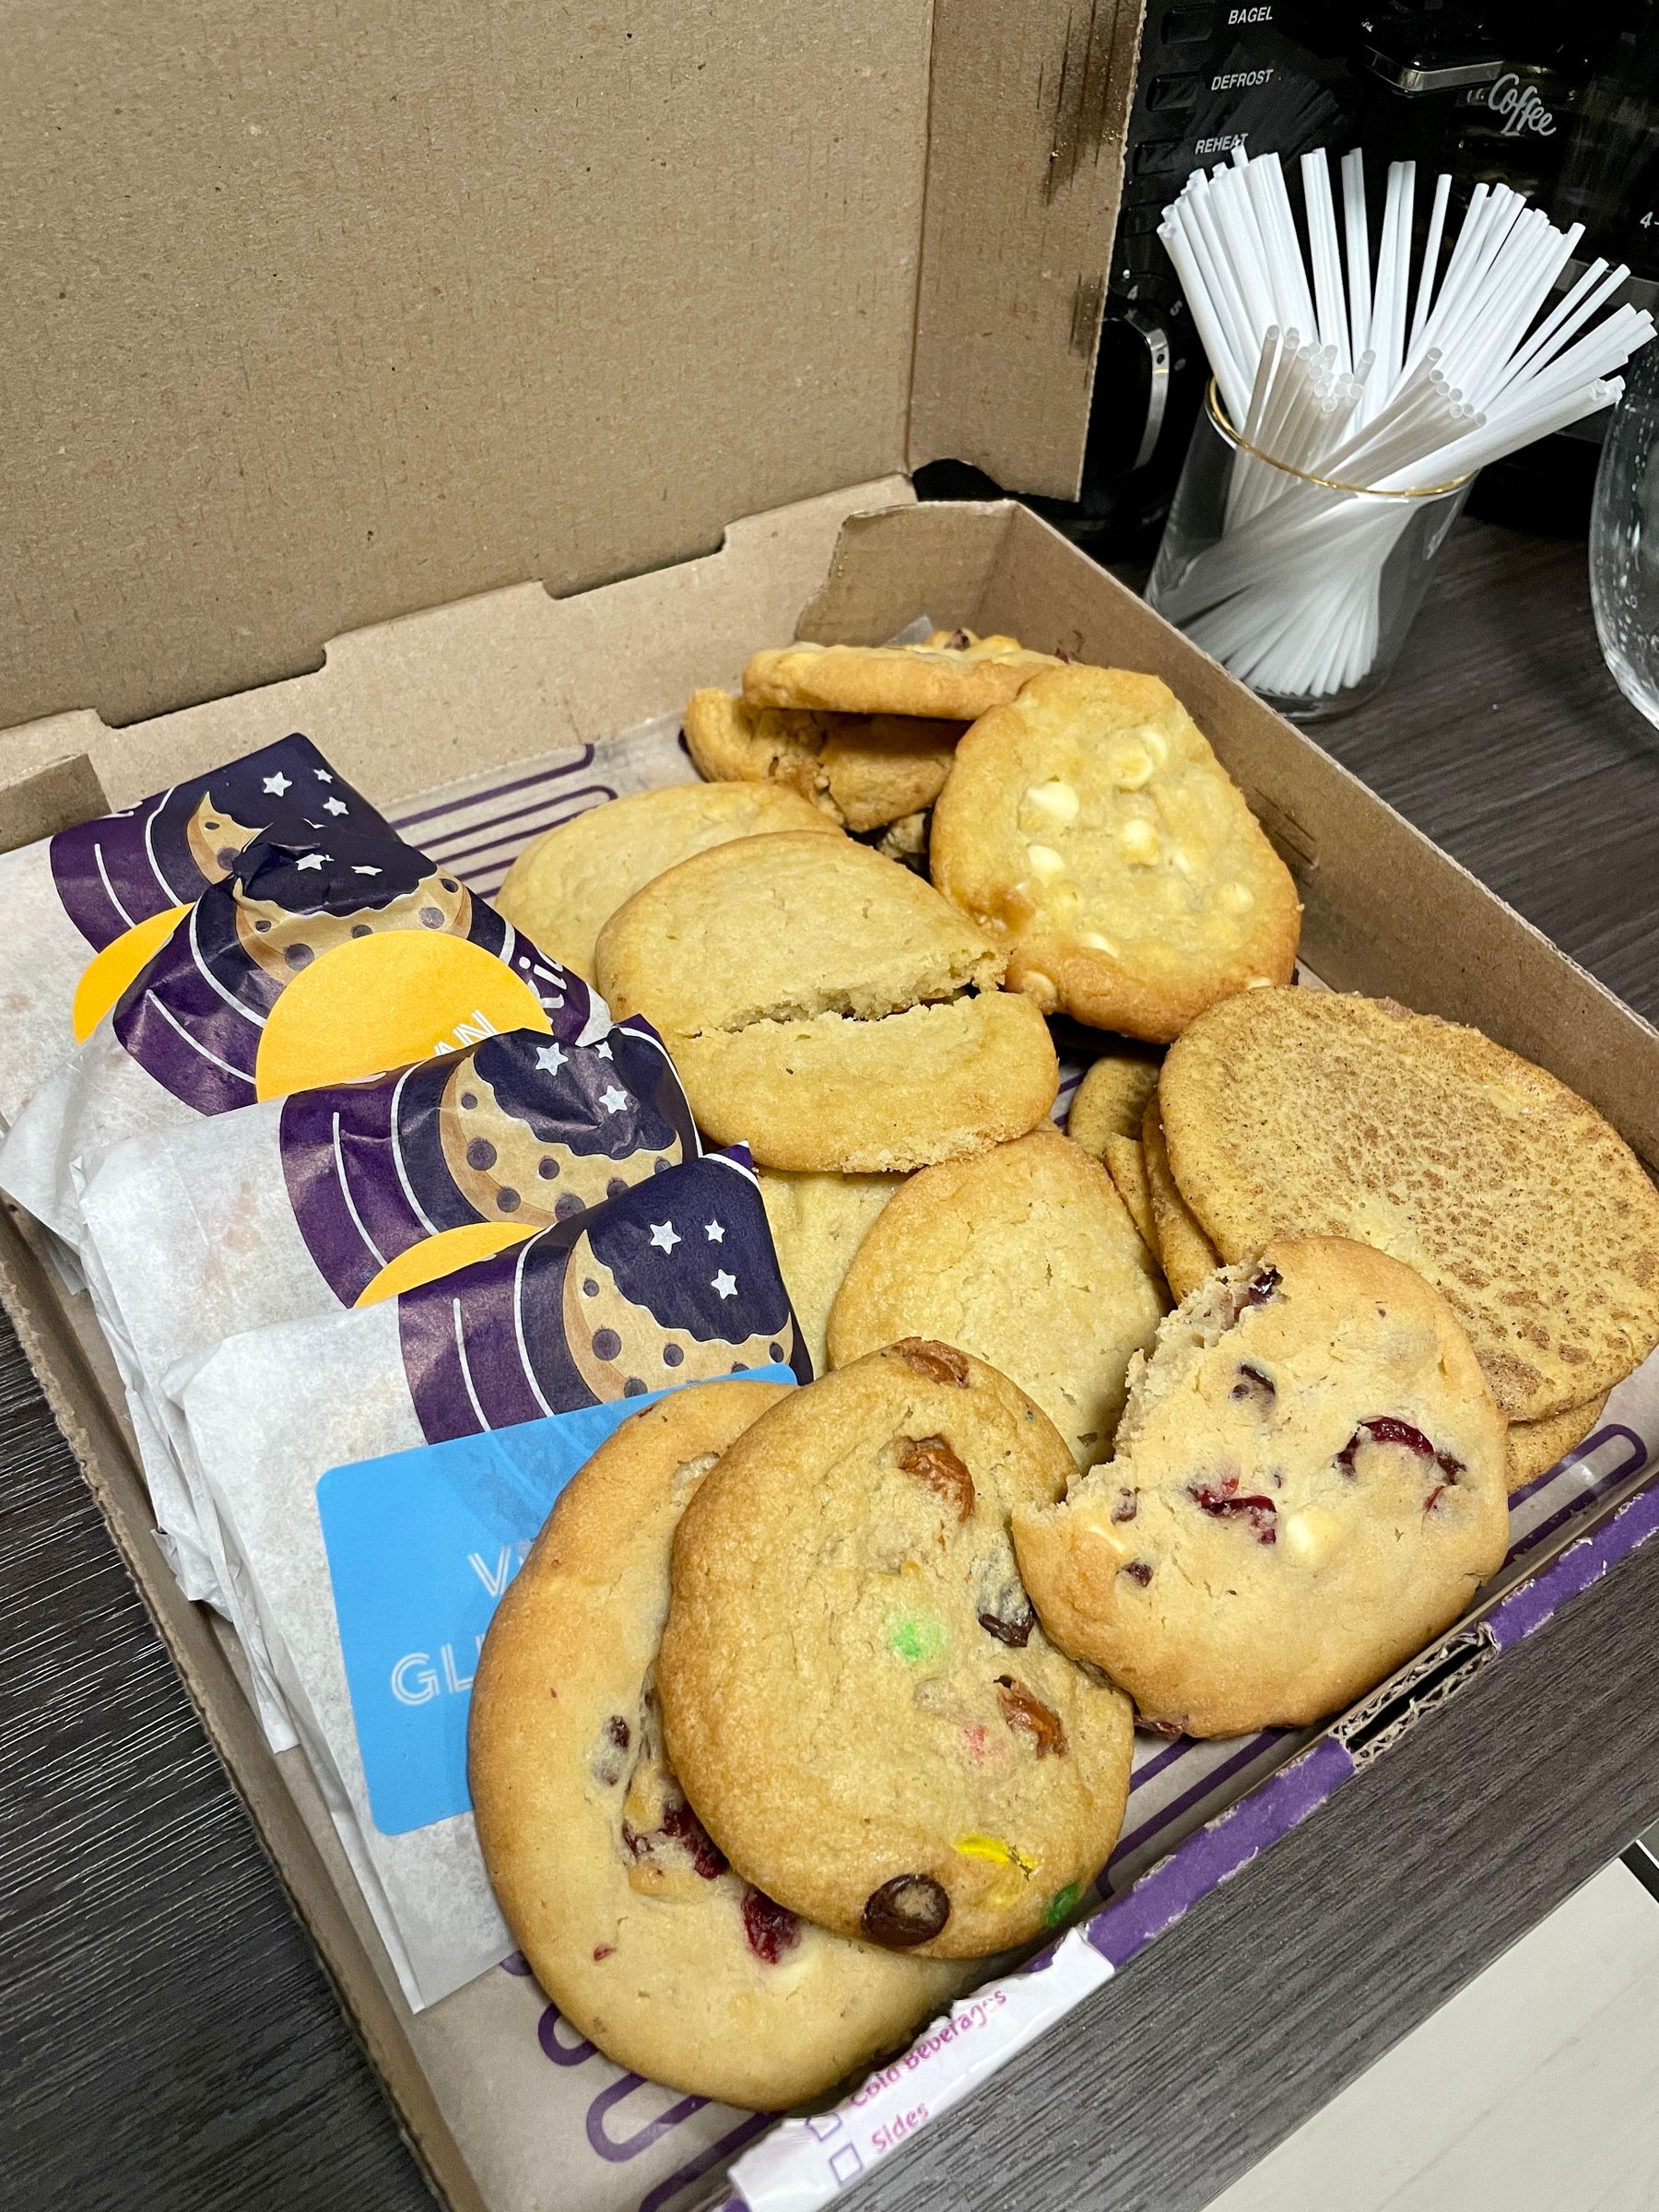 Insomnia Cookies | Downtown San Francisco